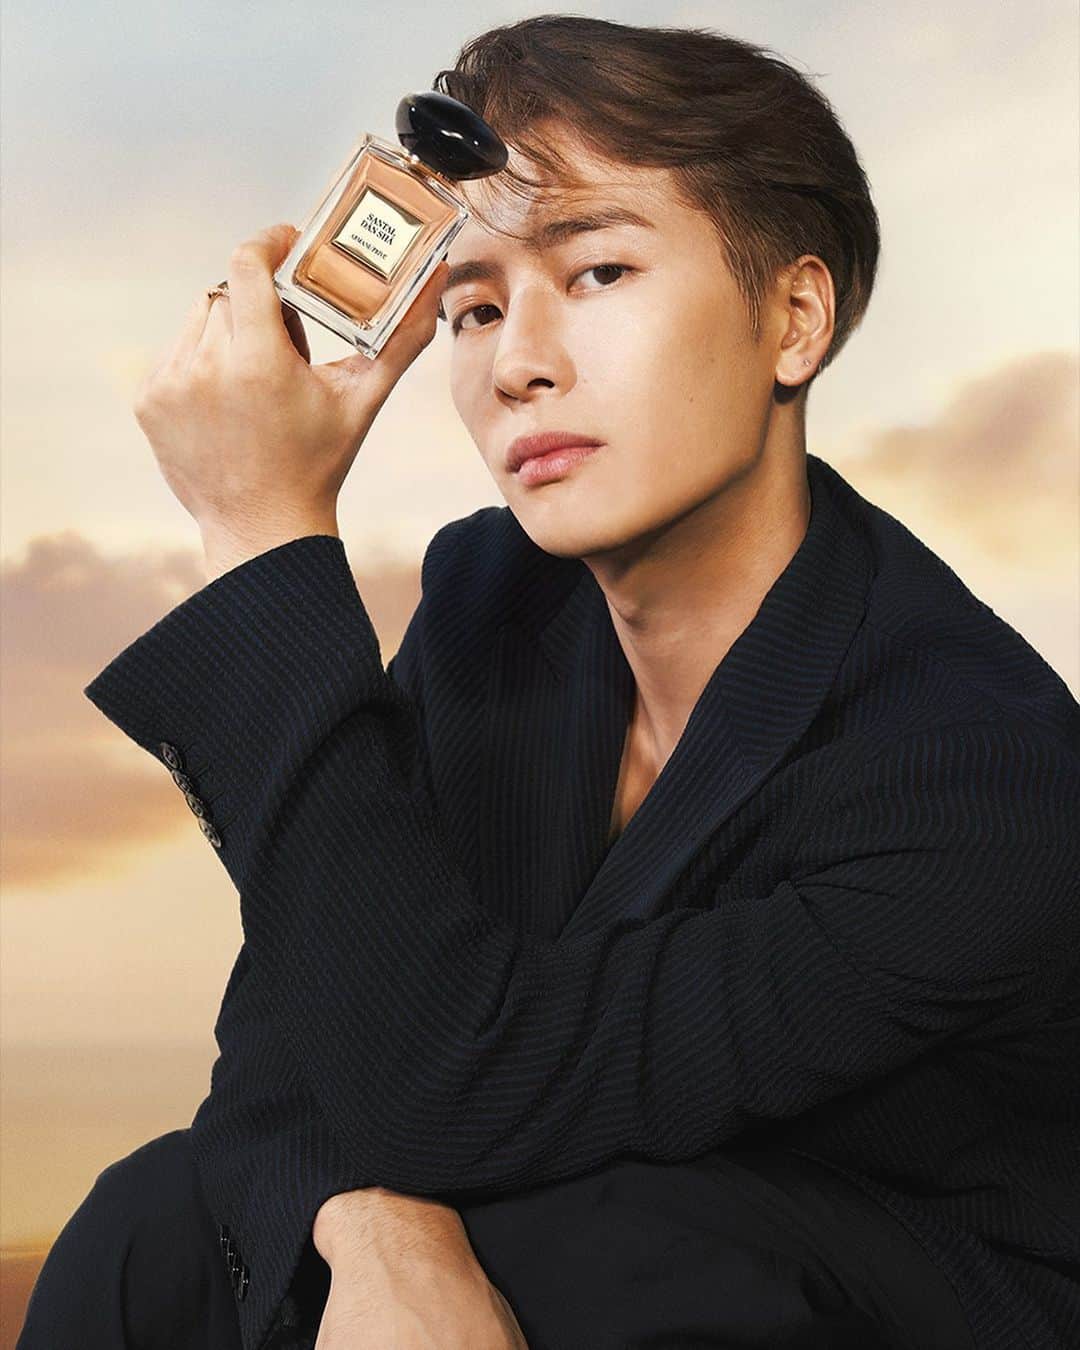 Armani Beautyのインスタグラム：「Refreshing Face for a refreshing fragrance. Introducing Armani beauty Global Fragrance Ambassador @jacksonwang852g7 as he embodies the Armani beauty fragrances, notably the Haute Couture fragrance range in the new campaign for Armani/Privé SANTAL DĀN SHĀ.  #Armanibeauty #ArmaniPrive #HauteCoutureFragrance #JacksonWang #Fragrance」